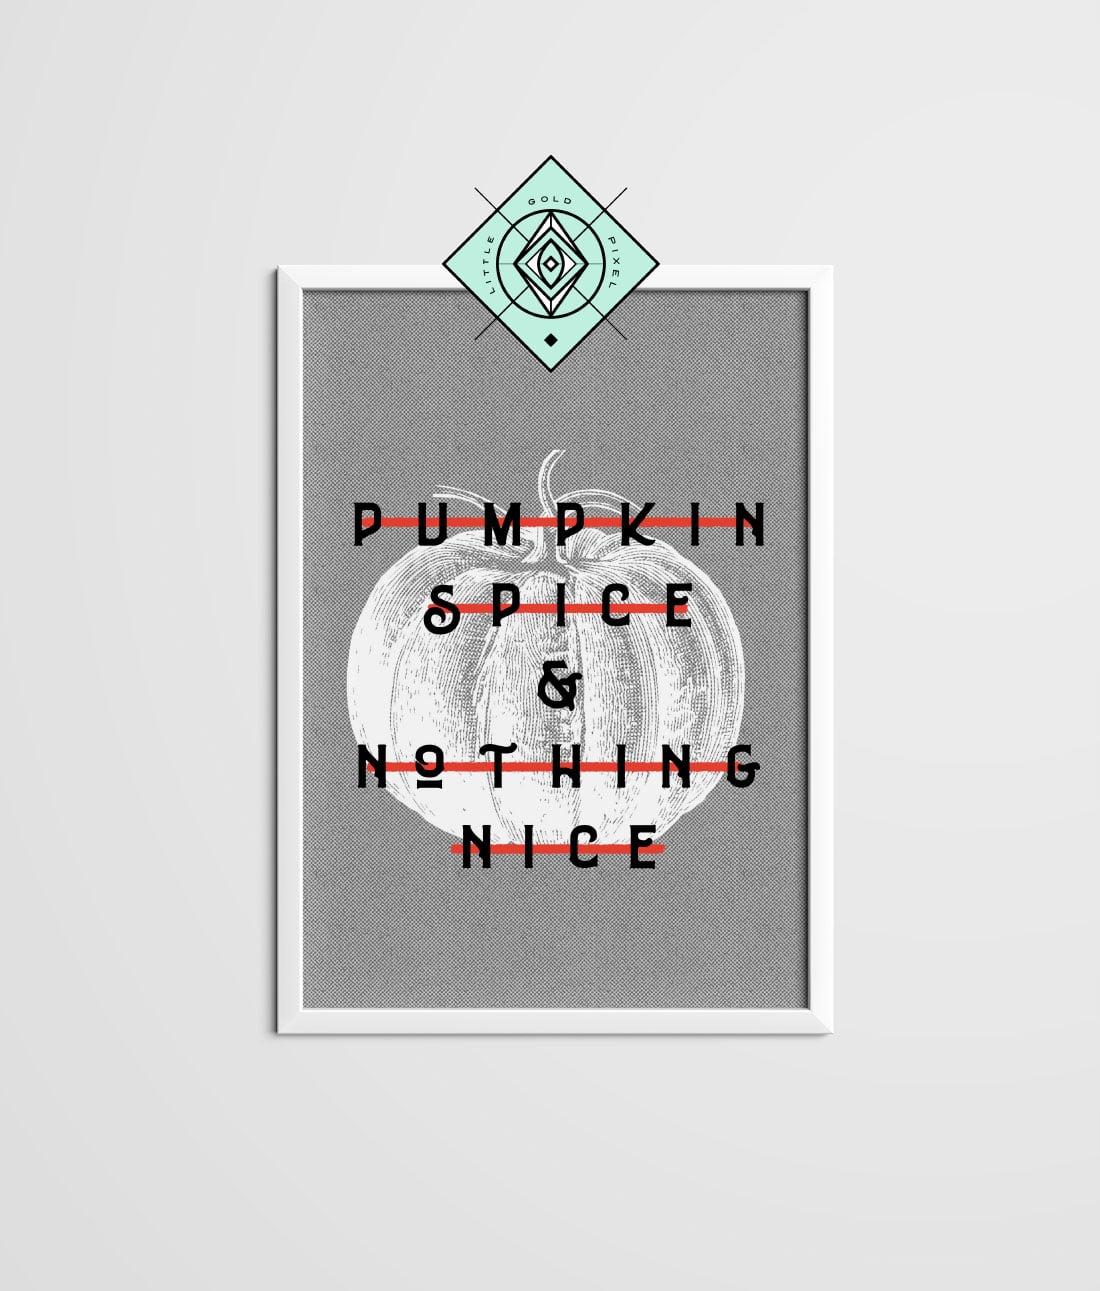 Pumpkin Spice & Nothing Nice • Freebie Fridays • Little Gold Pixel • In which I share a Pumpkin Spice & Nothing Nice free printable to help you show off your naughty side this fall. Download, print and hang today!